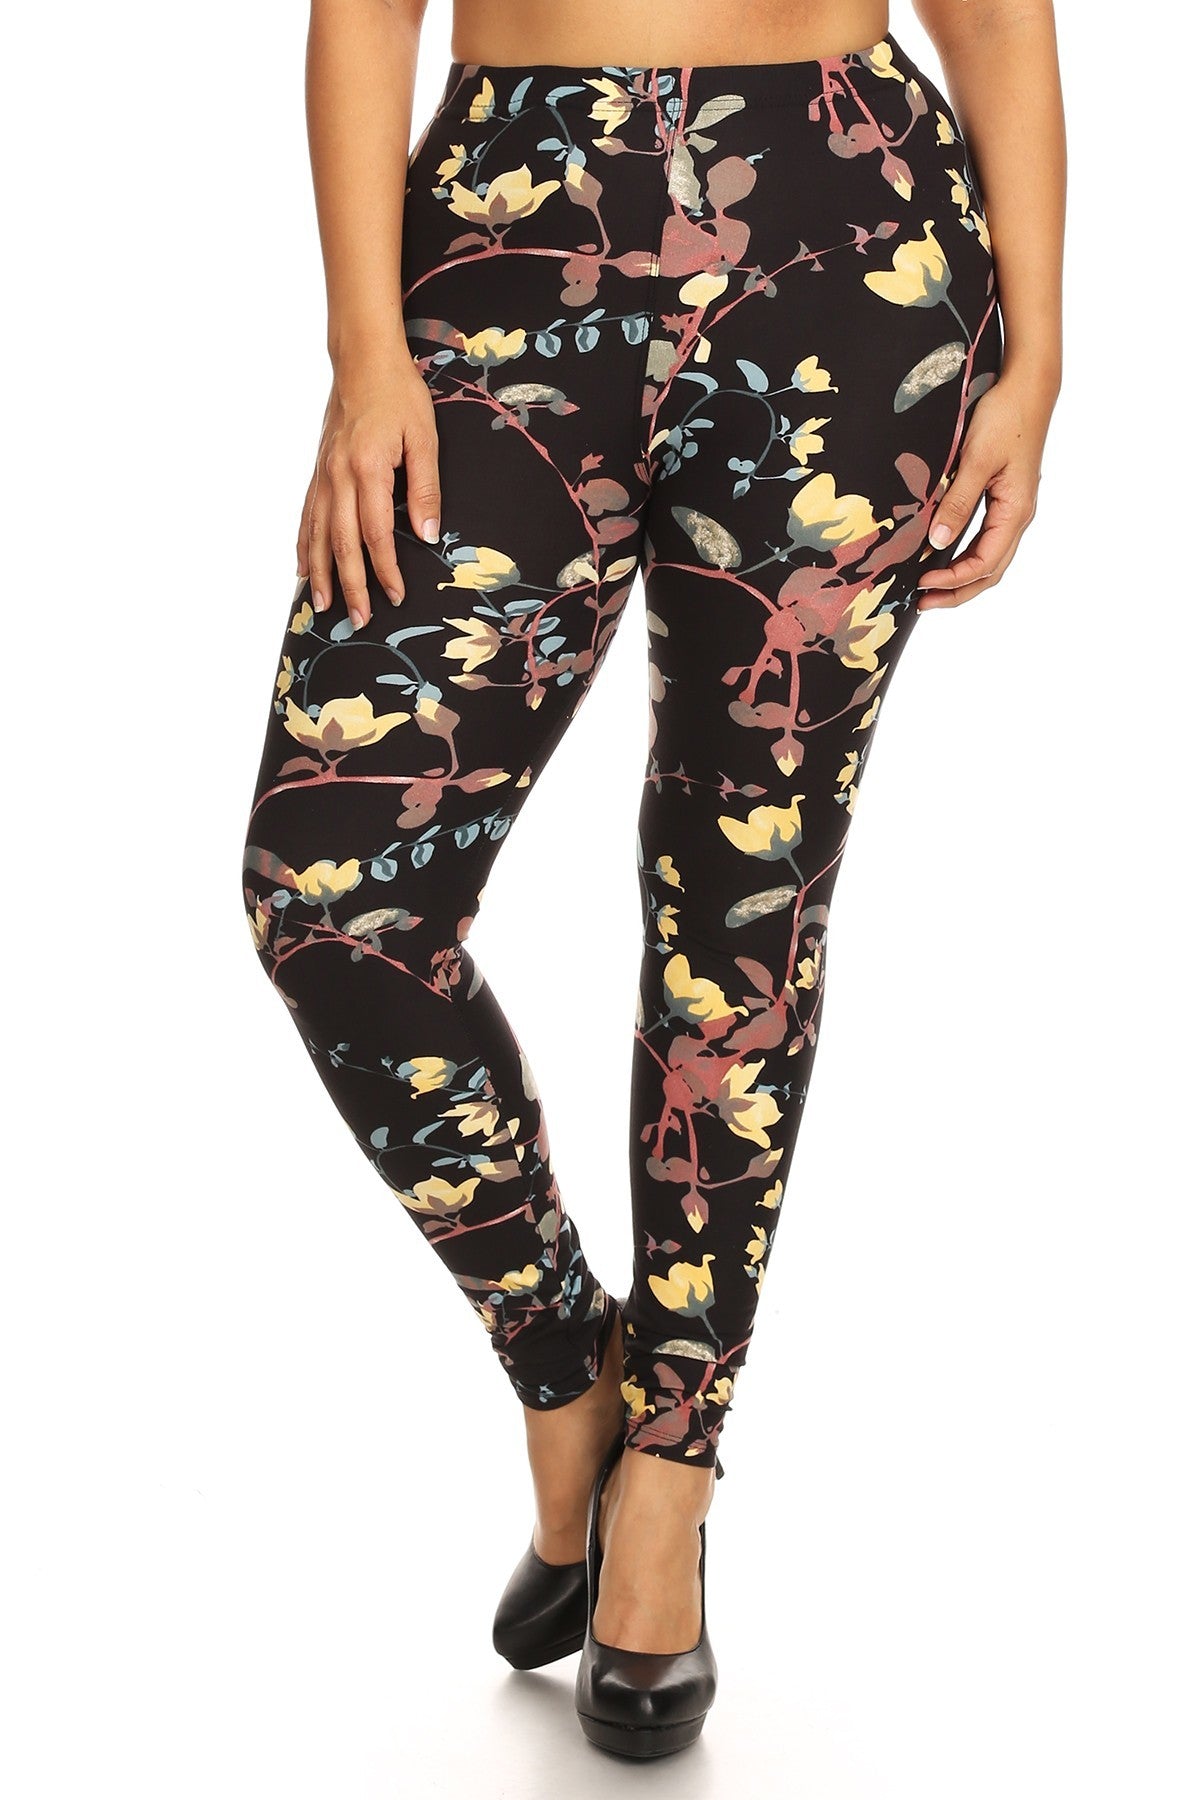 Plus Size All Over Floral Print, Full Length Leggings In A Slim Fitting Style With A Banded High Waist